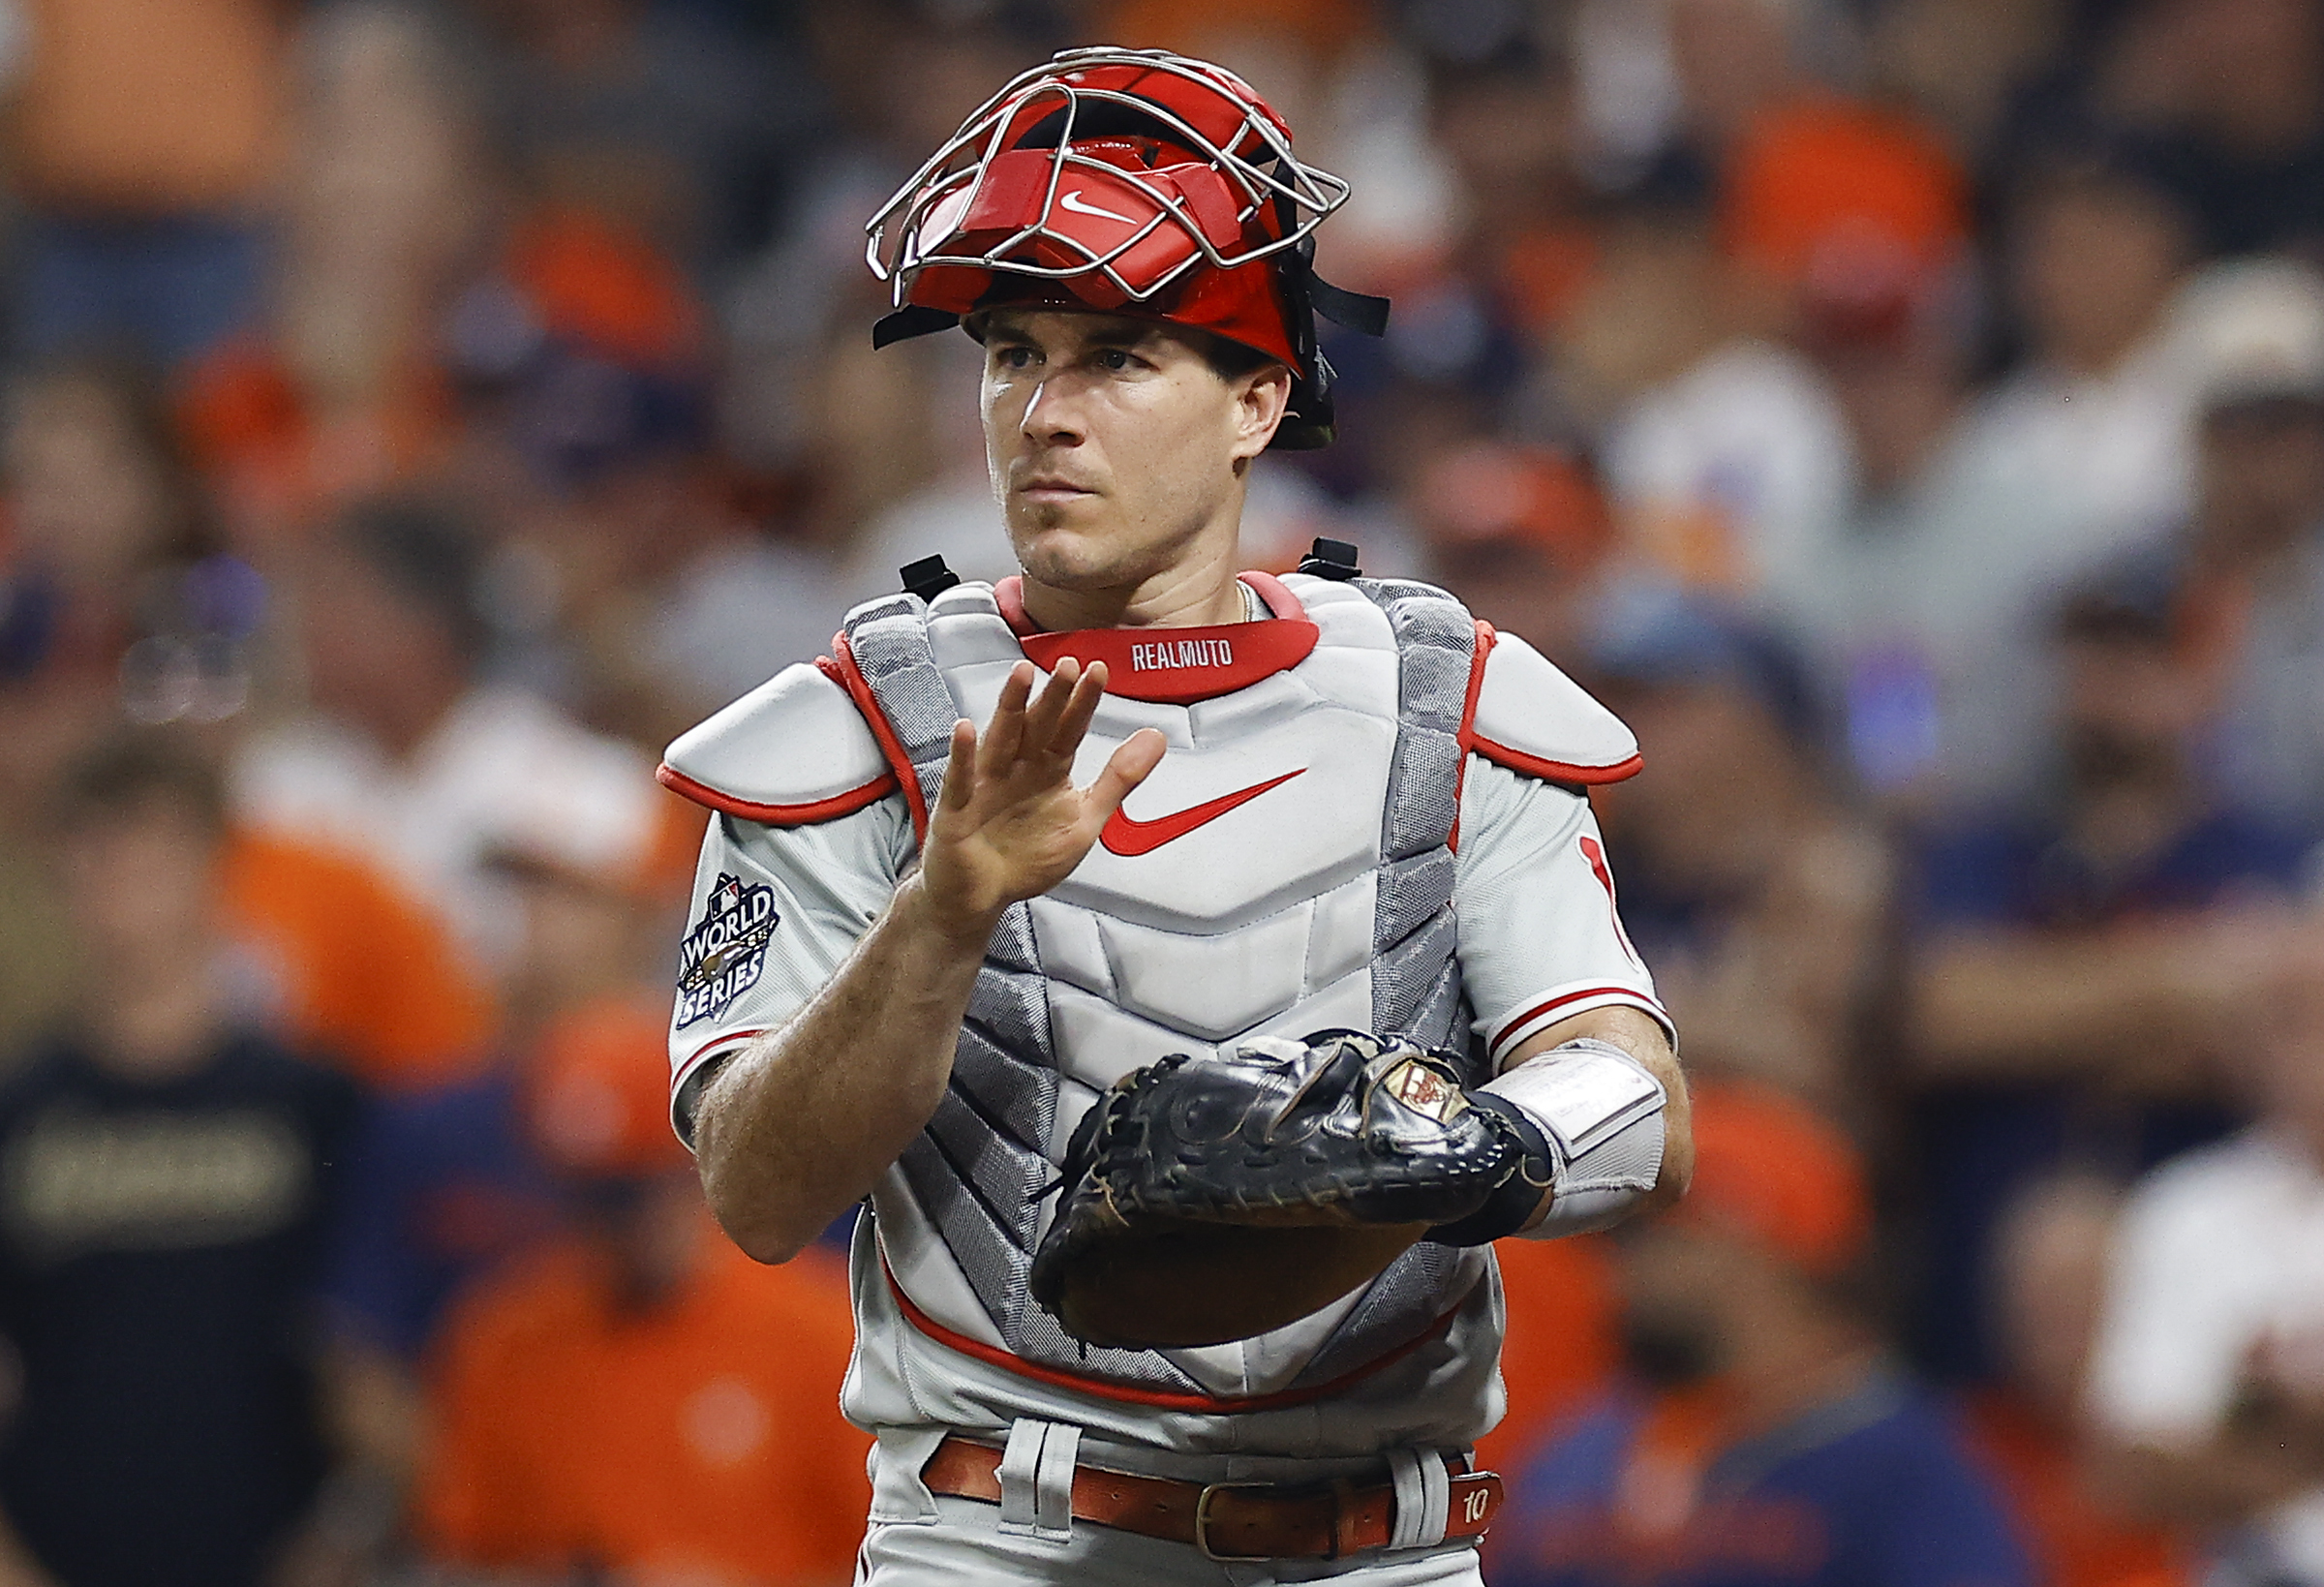 Philadelphia Phillies' Catcher J.T. Realmuto Named 2022 Gold Glove Award  Finalist - Sports Illustrated Inside The Phillies